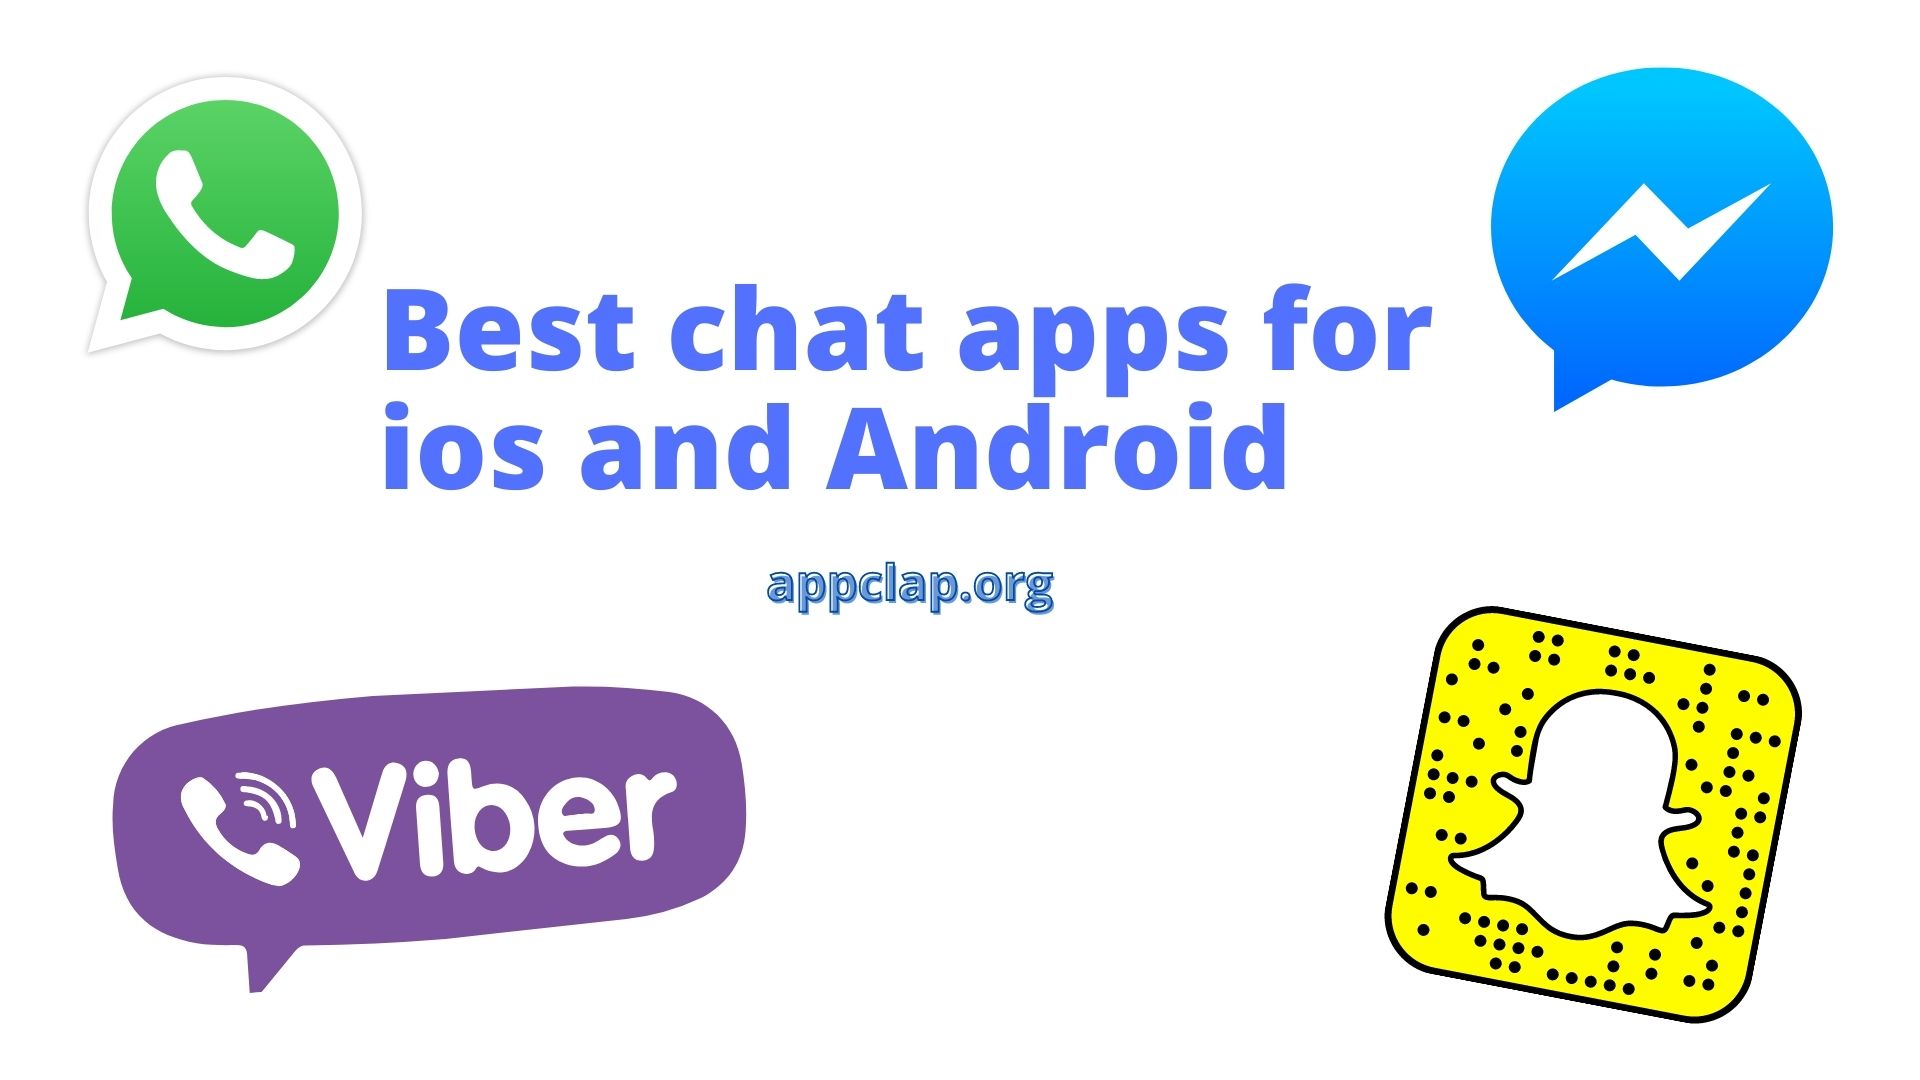 Top chat apps